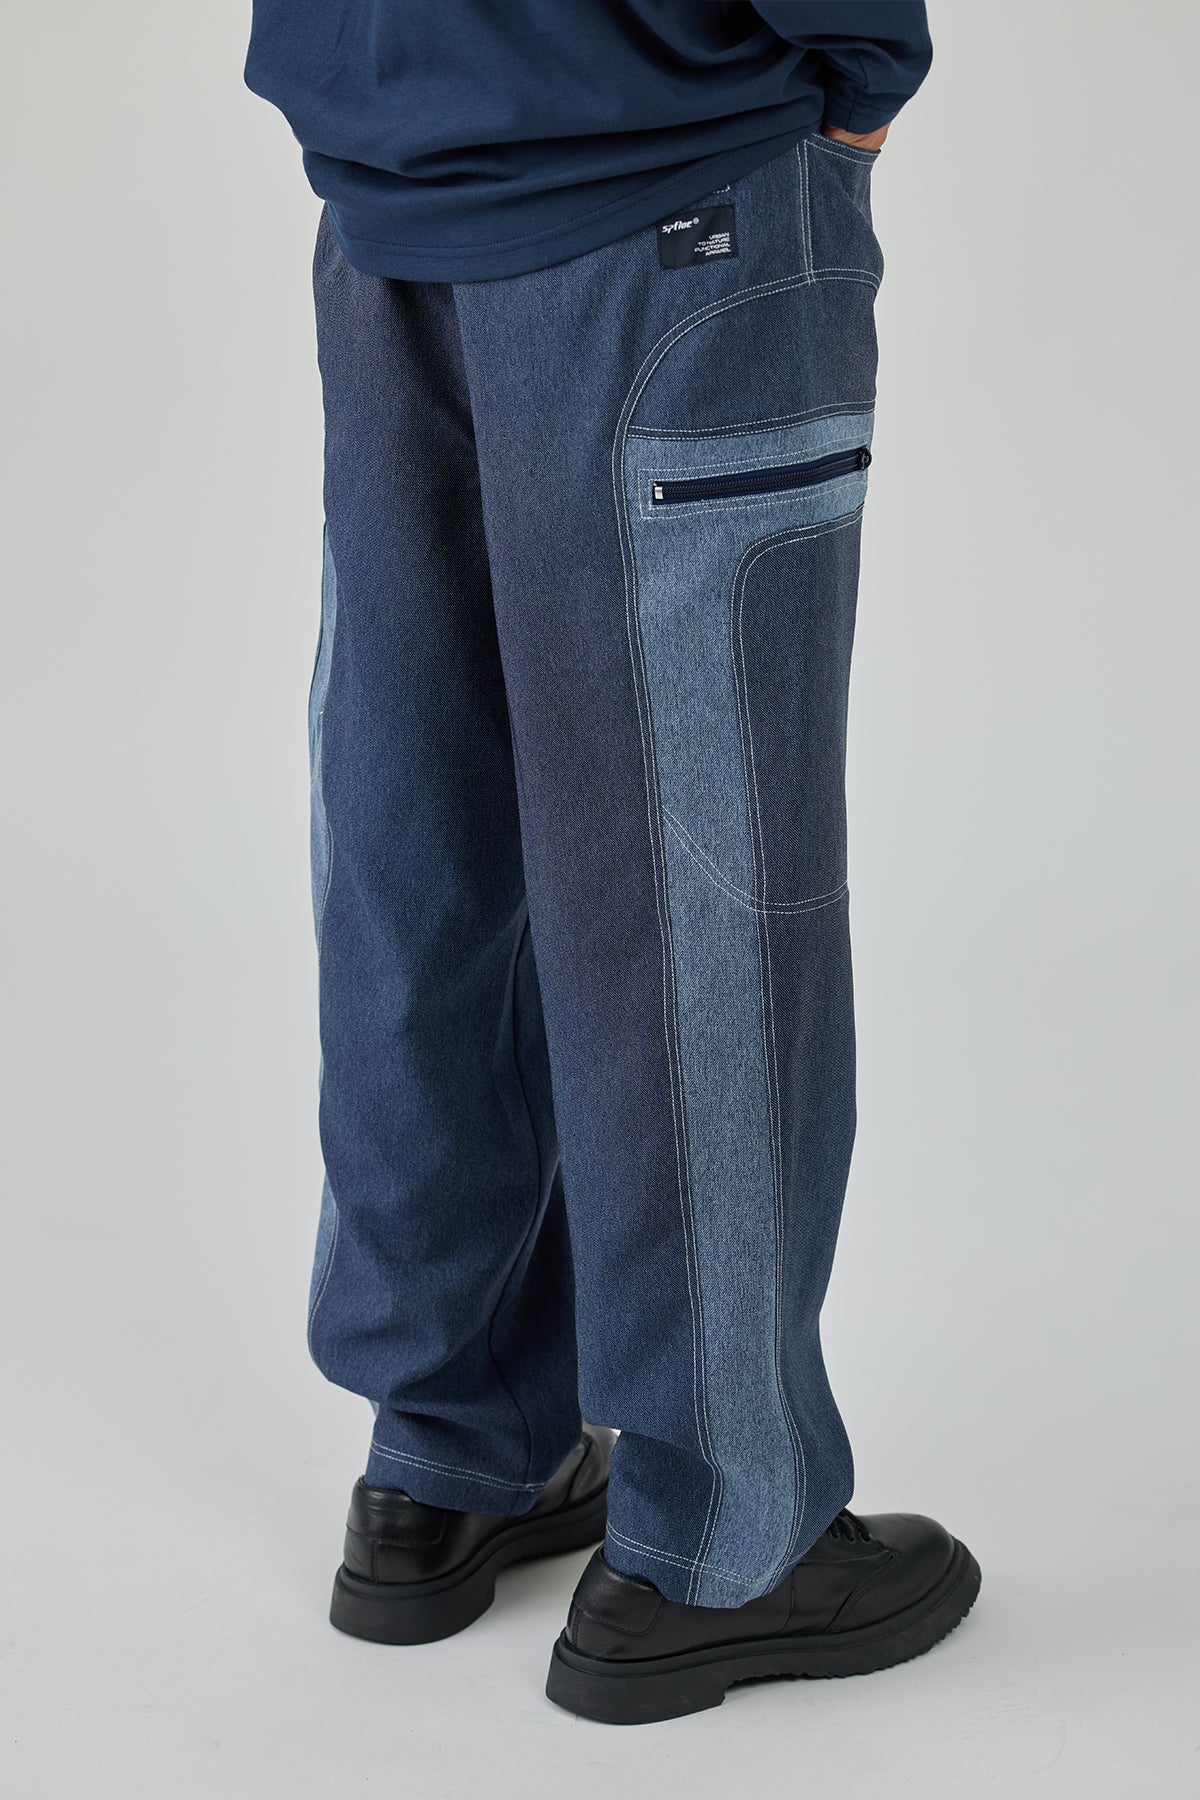 Blue Contrast Stitched Jeans